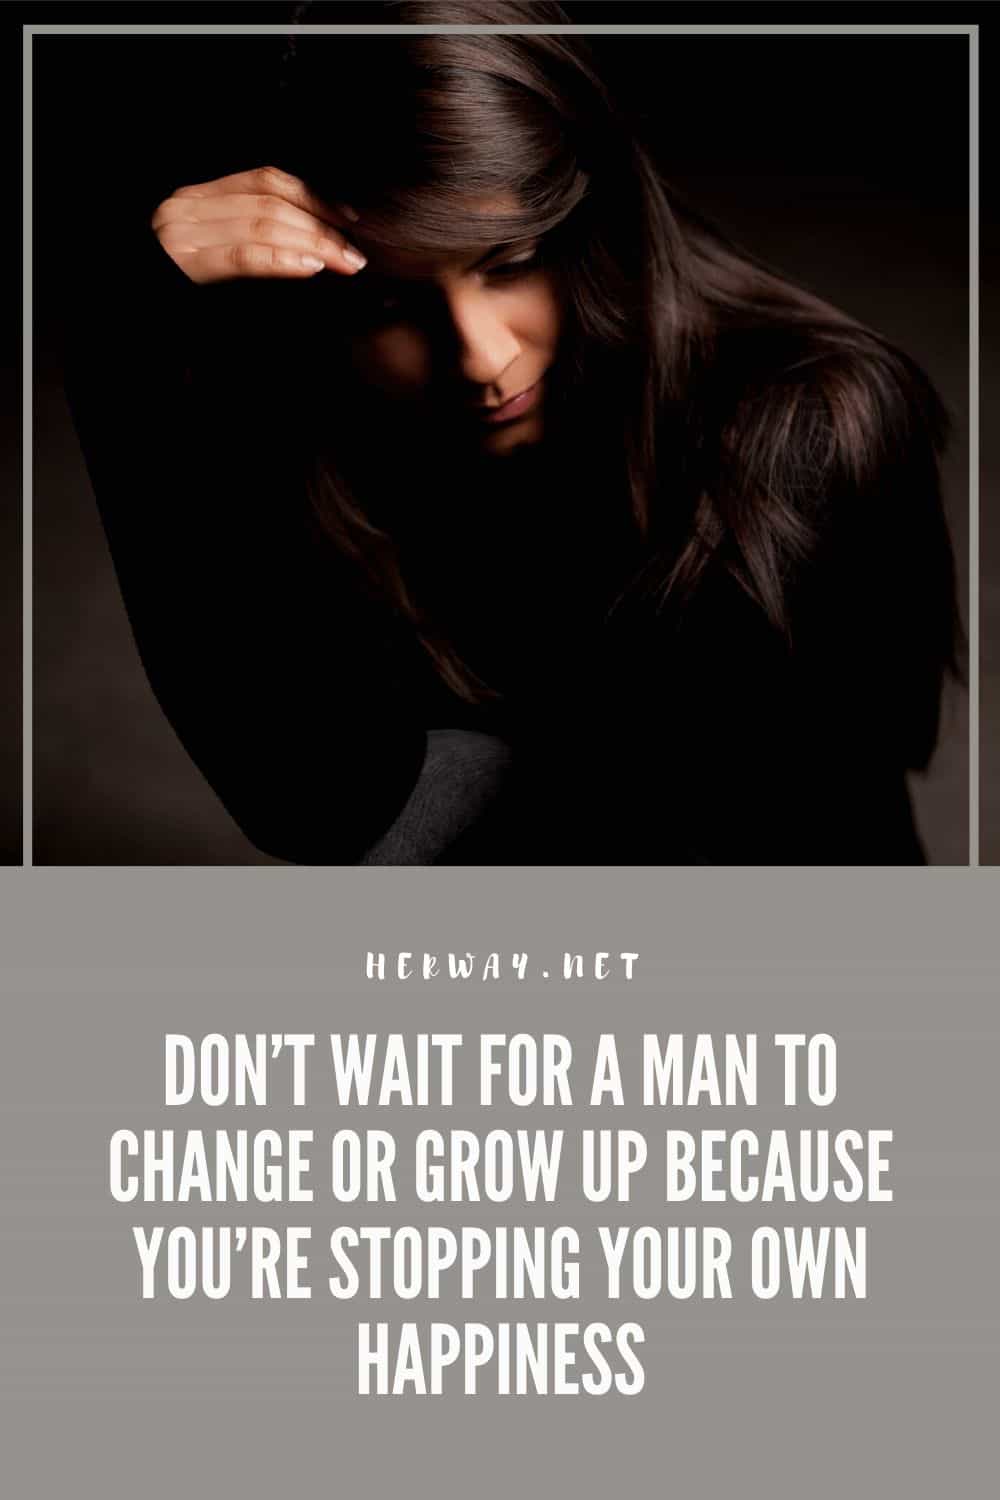 Don’t Wait For A Man To Change Or Grow Up Because You’re Stopping Your Own Happiness